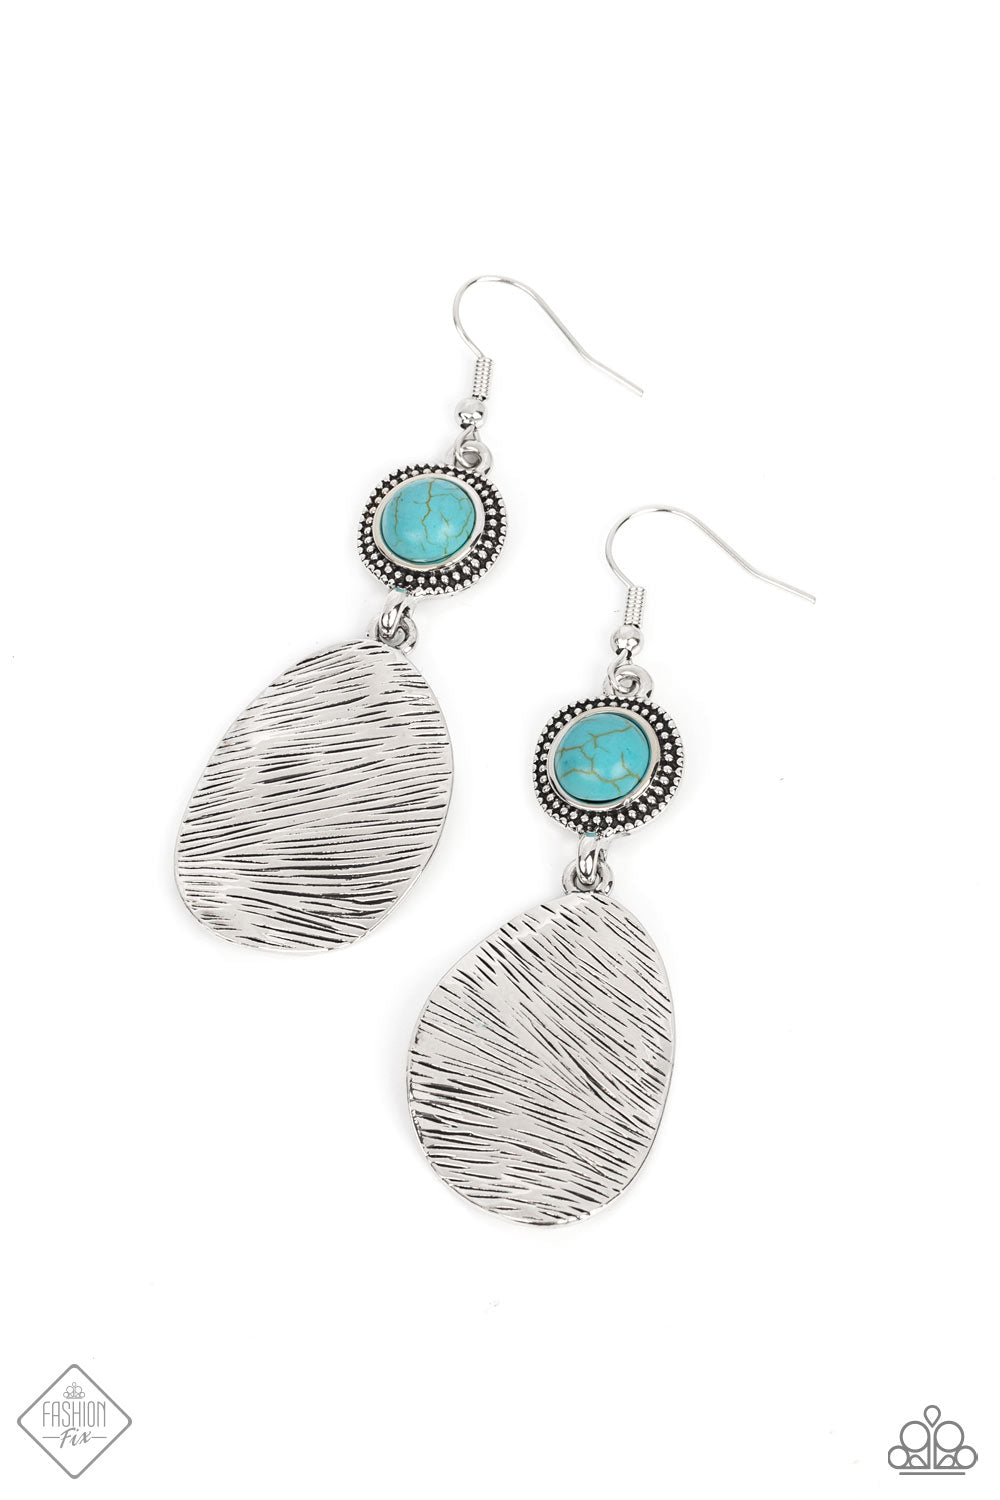 Paparazzi Accessories - HOMESTEAD on the Range - Blue Earrings March FASHION FIX 2022 #SSF0322